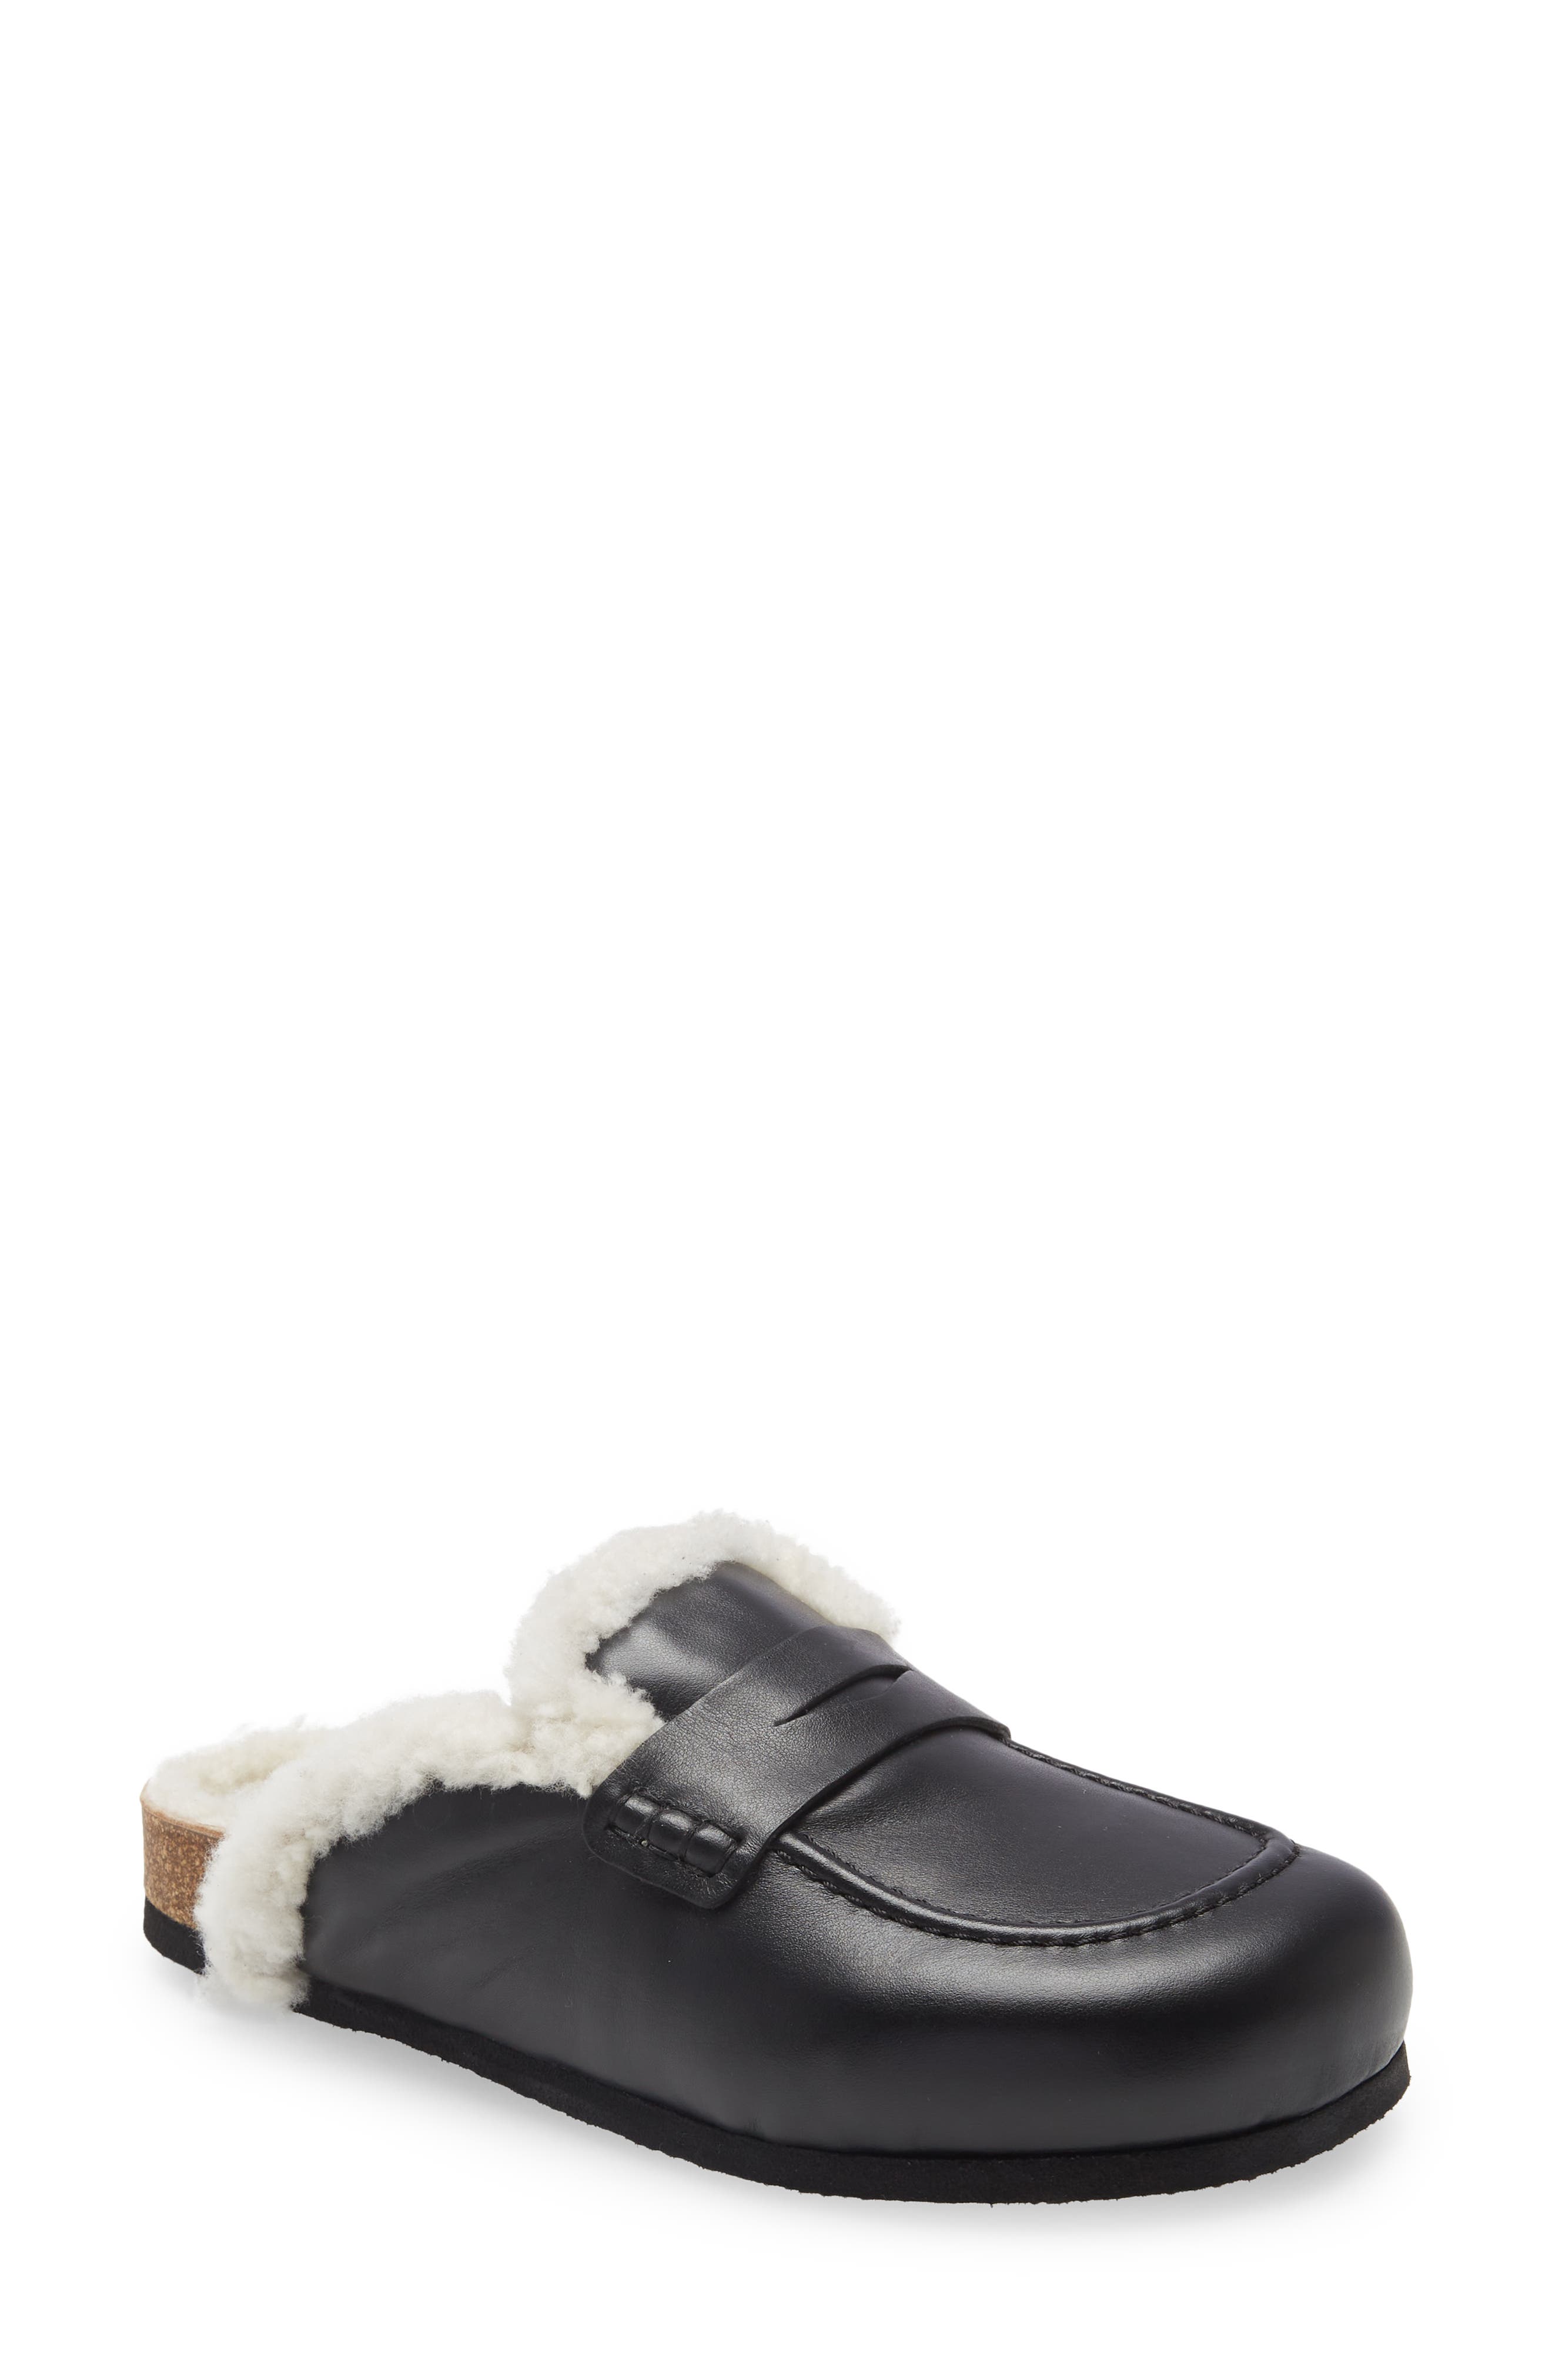 JW Anderson Genuine Shearling Lined Loafer Mule in Black at Nordstrom, Size 6Us